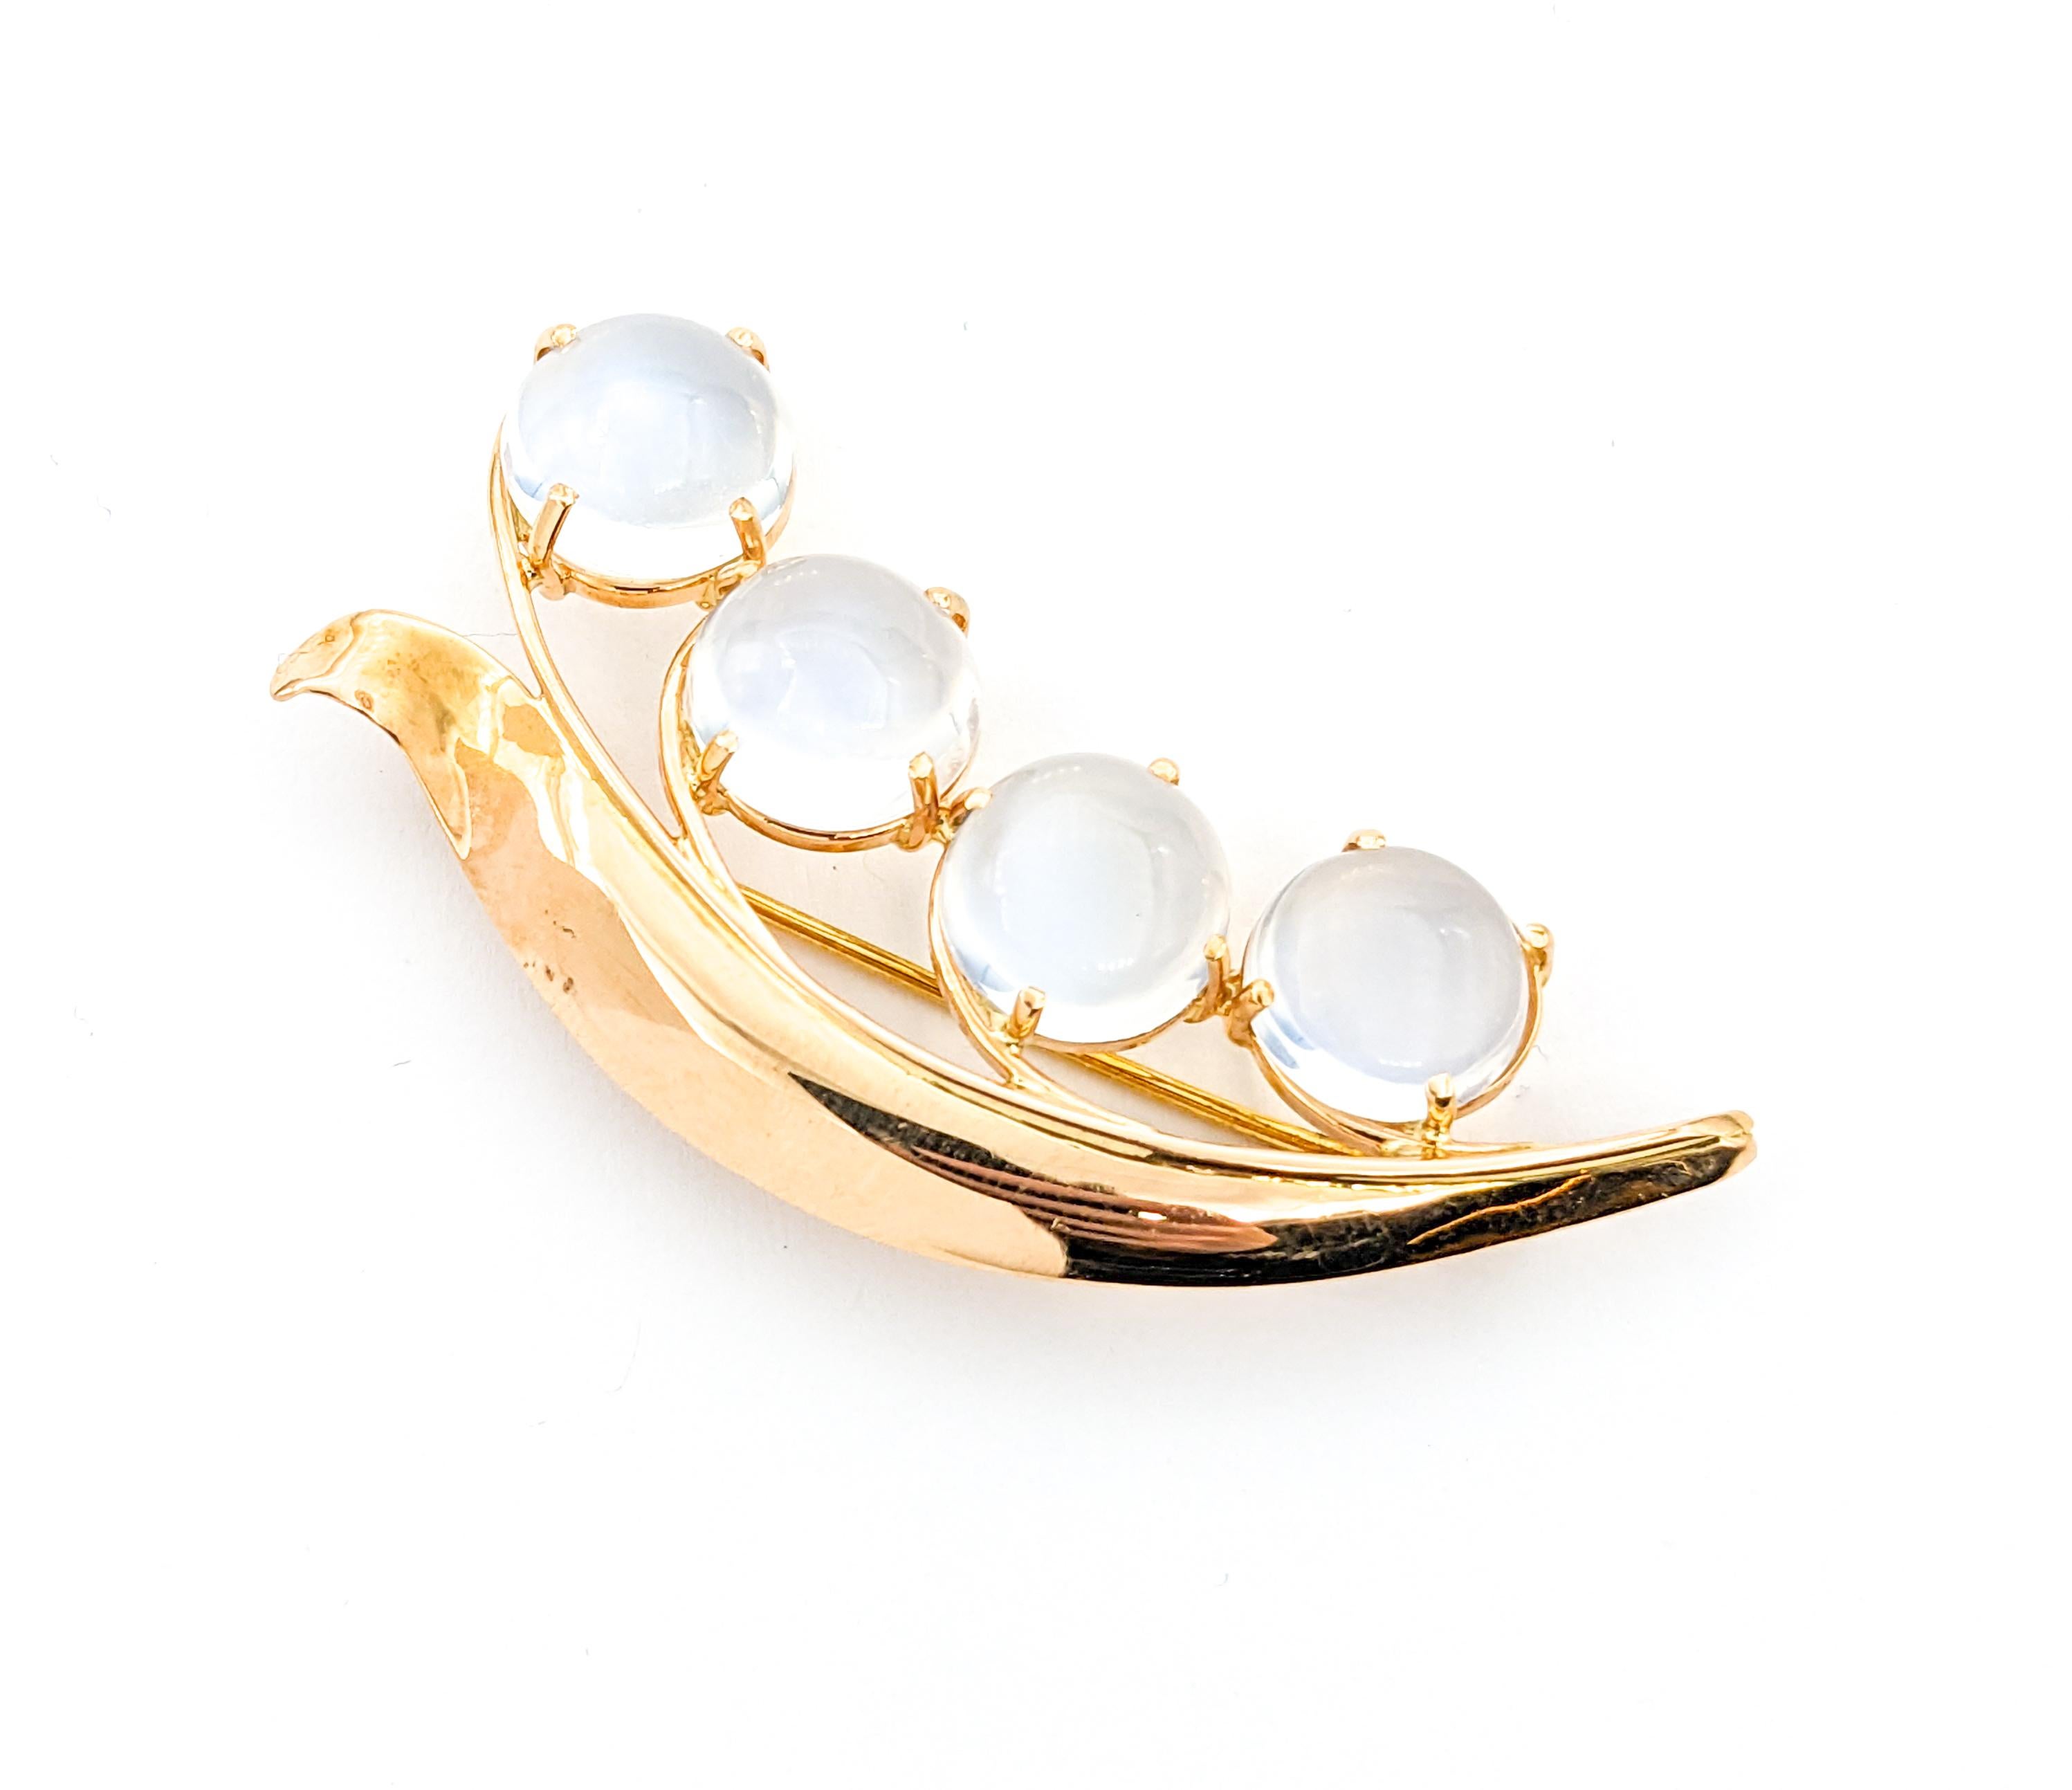 Mid-Century Cabochon Moonstone Vine Brooch In Yellow Gold

Introducing a captivating Vintage Brooch with a Mid-Century Leaf Motif, adorned with a row of four stunning 10-11mm Cabochon Moonstones. This exquisite piece is crafted in 14k yellow gold